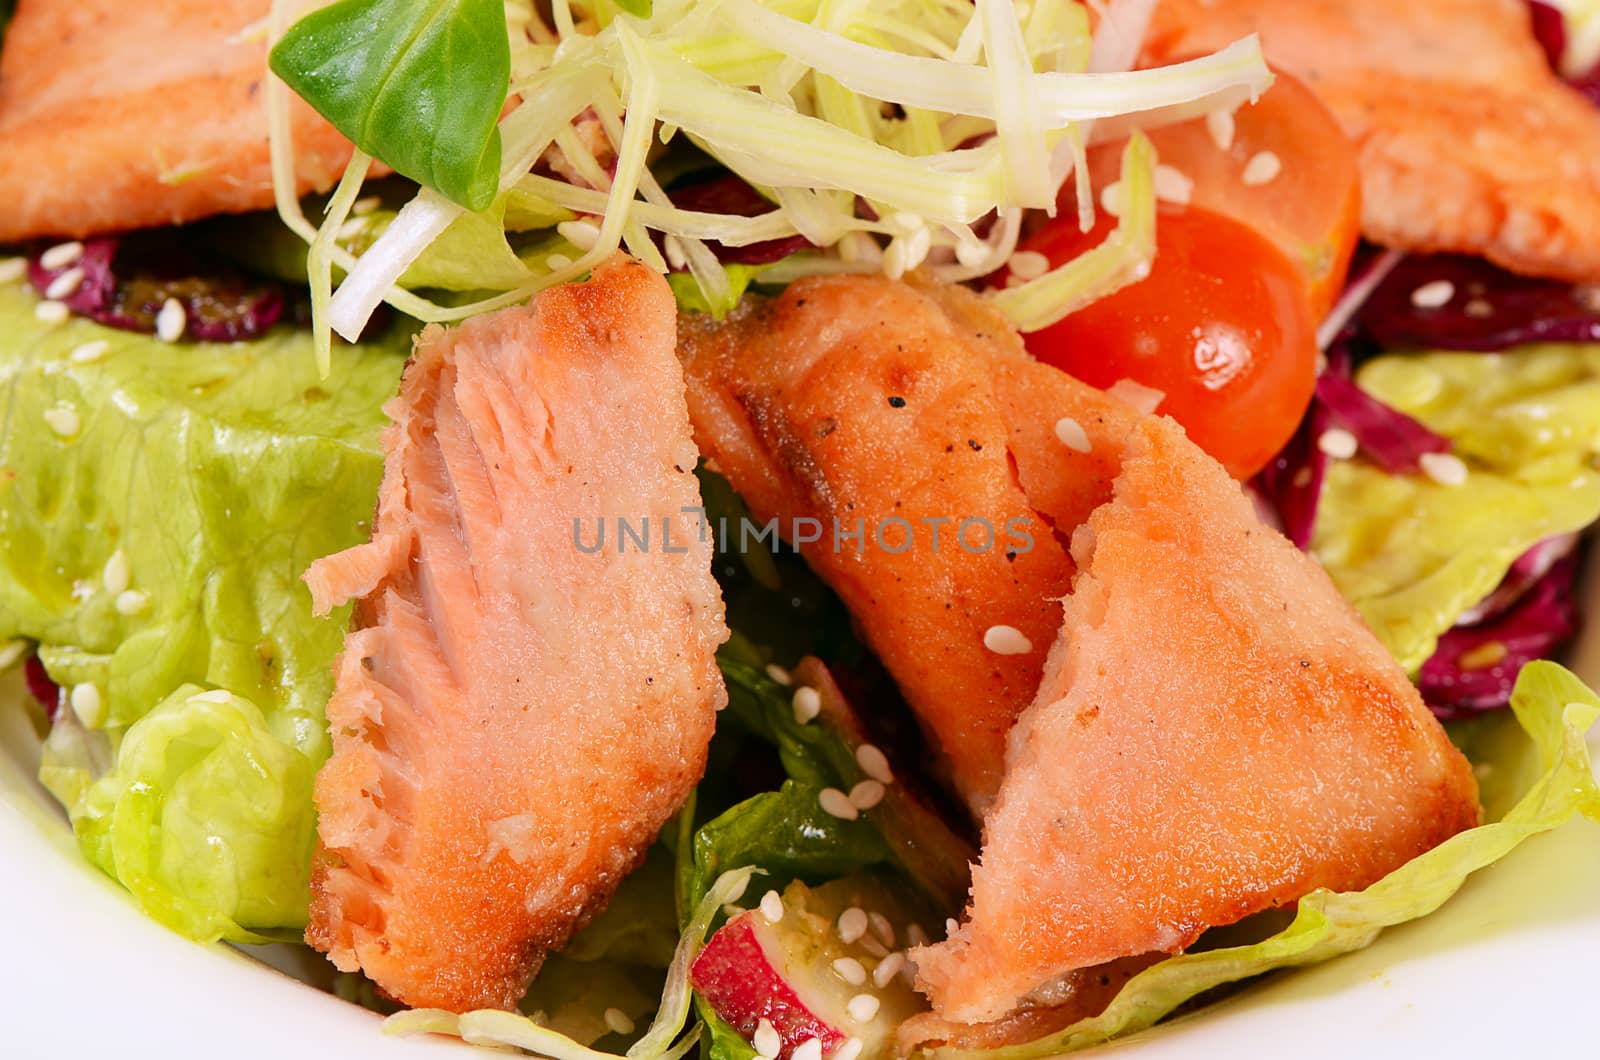 Salad from seafood and a salmon close-up